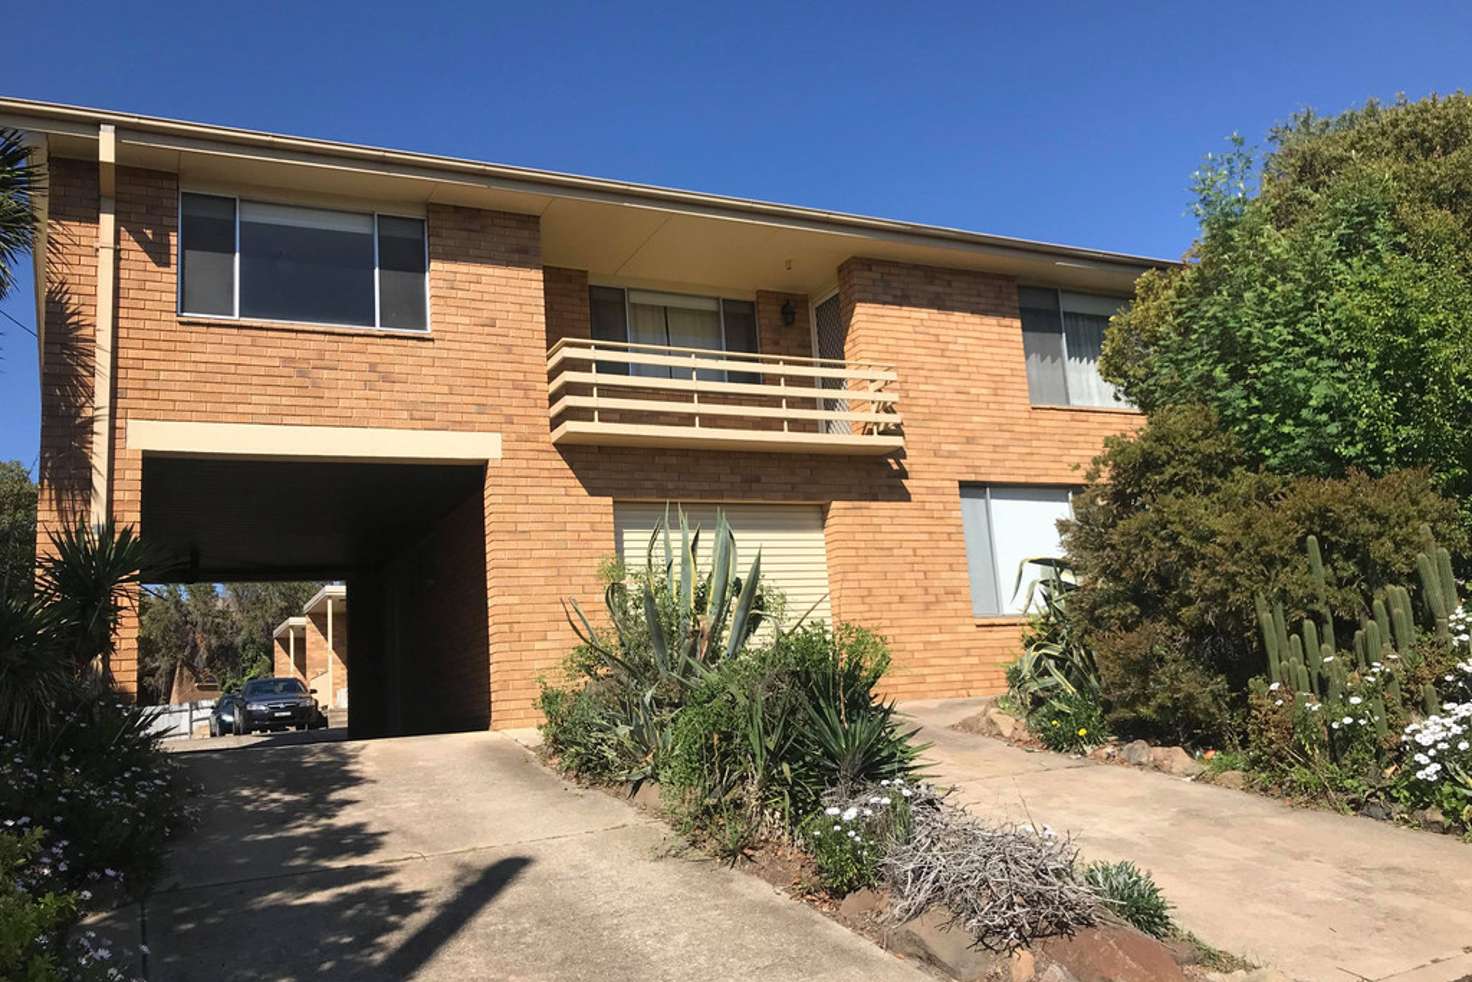 Main view of Homely unit listing, 1/24-26 Mundy St, Goulburn NSW 2580